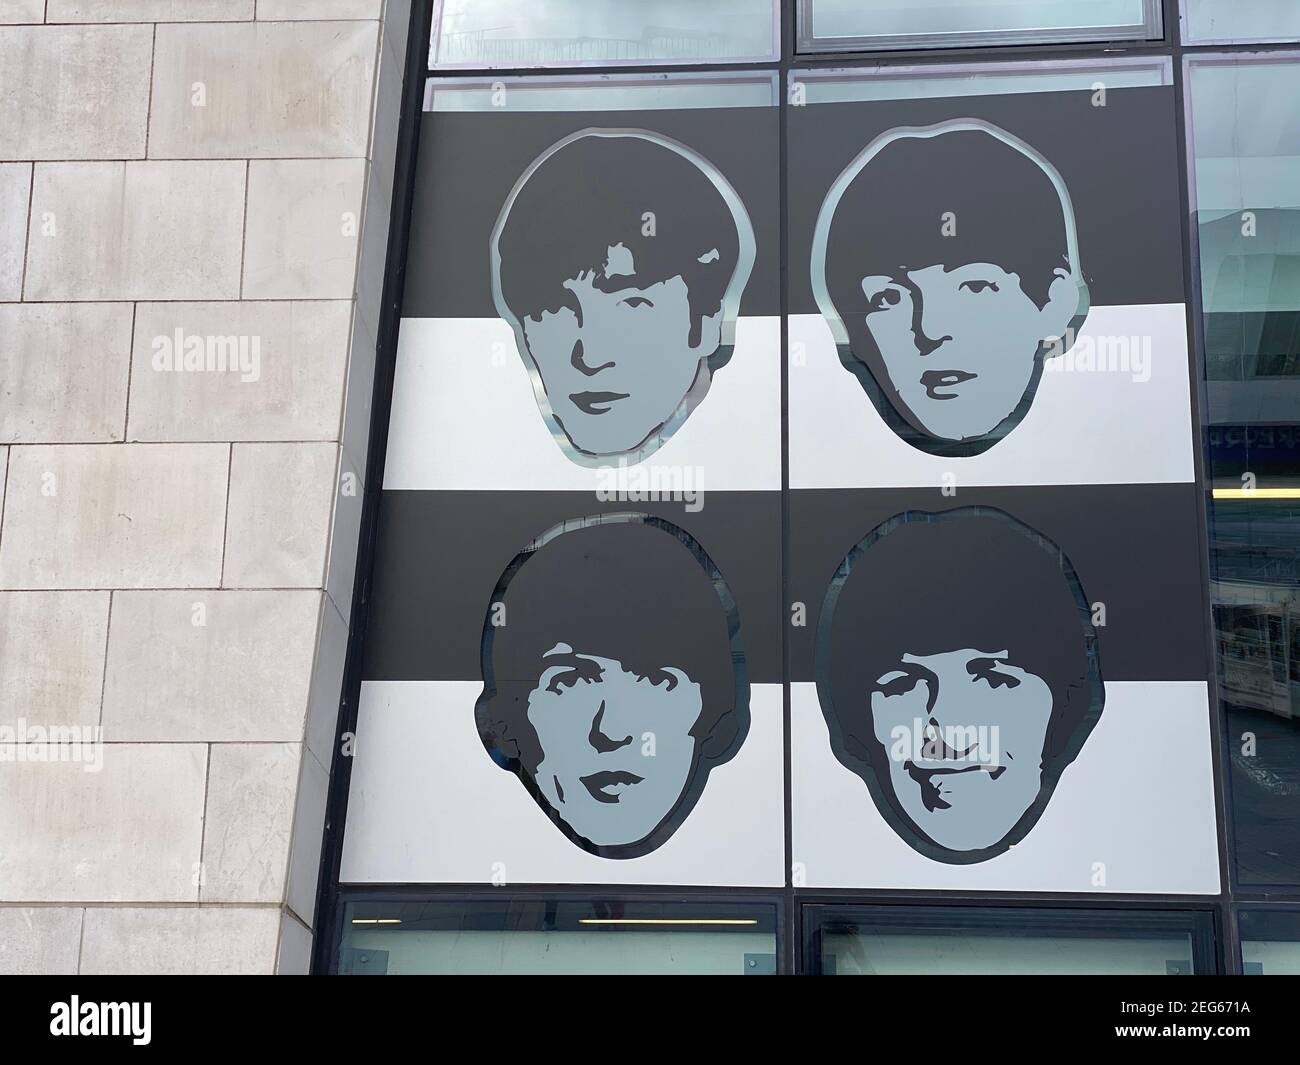 Liverpool, UK - September 2020: Signs showing the beatles band in Liverpool Stock Photo